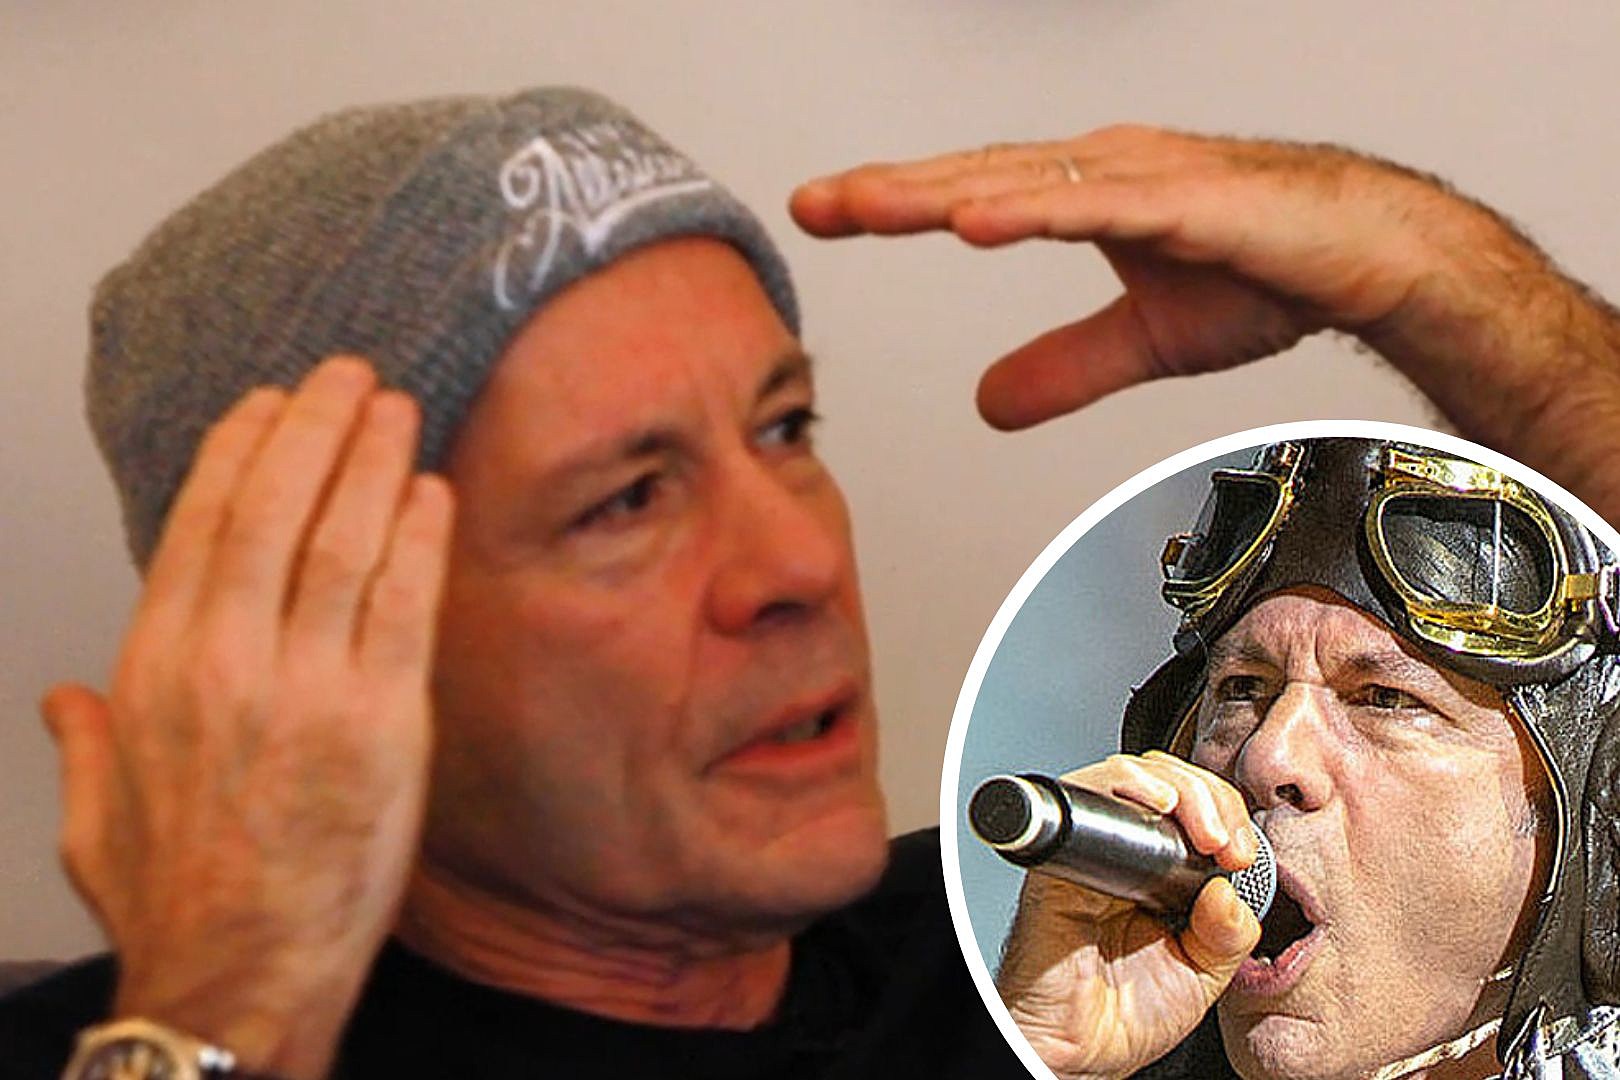 What Is Iron Maiden's Bruce Dickinson Actually Bad At? Interview